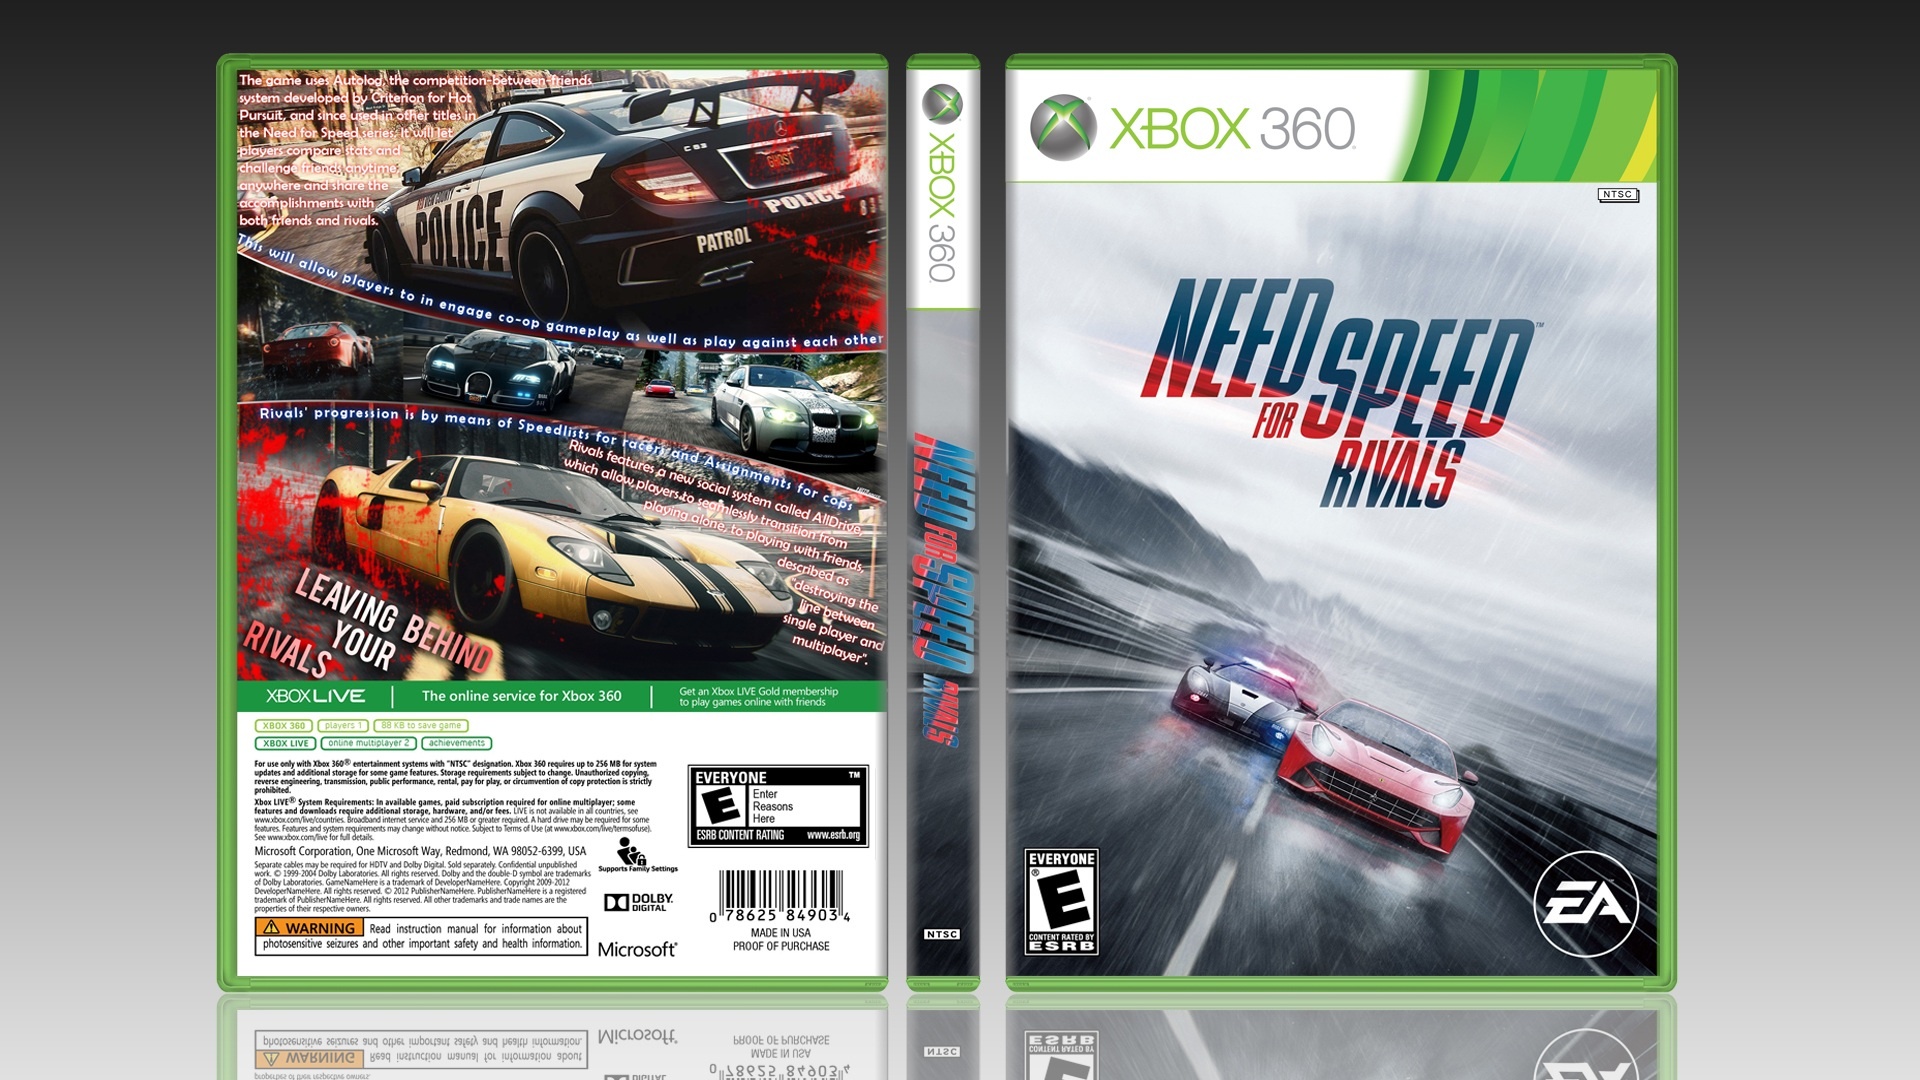 NEED FOR SPEED RIVALS box cover